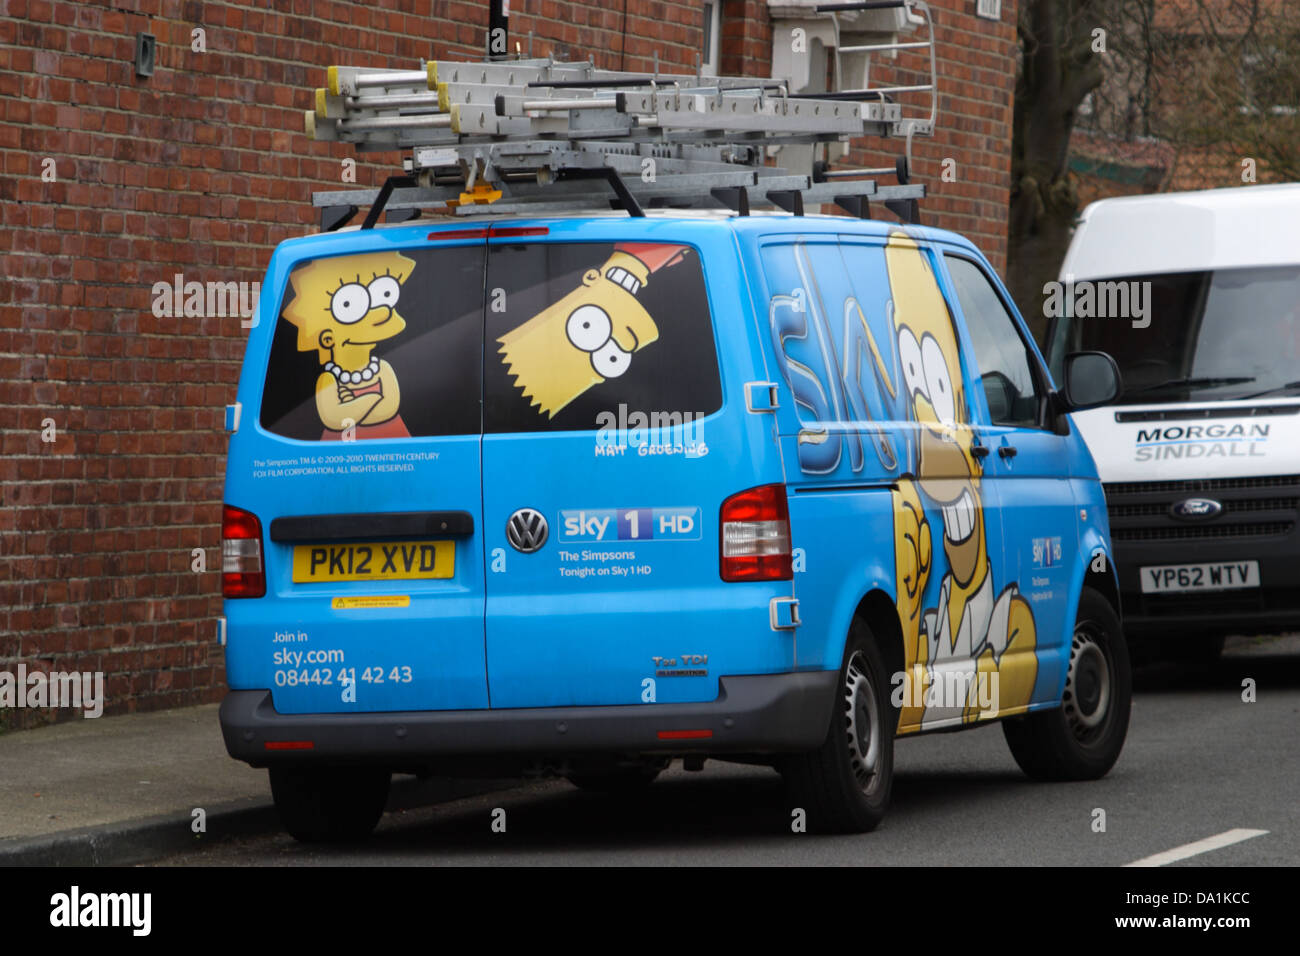 Sky Van, illustrated with Simpsons characters, bart, homer, lisa, ladders on top, white van in front. Parked outside a house. Stock Photo